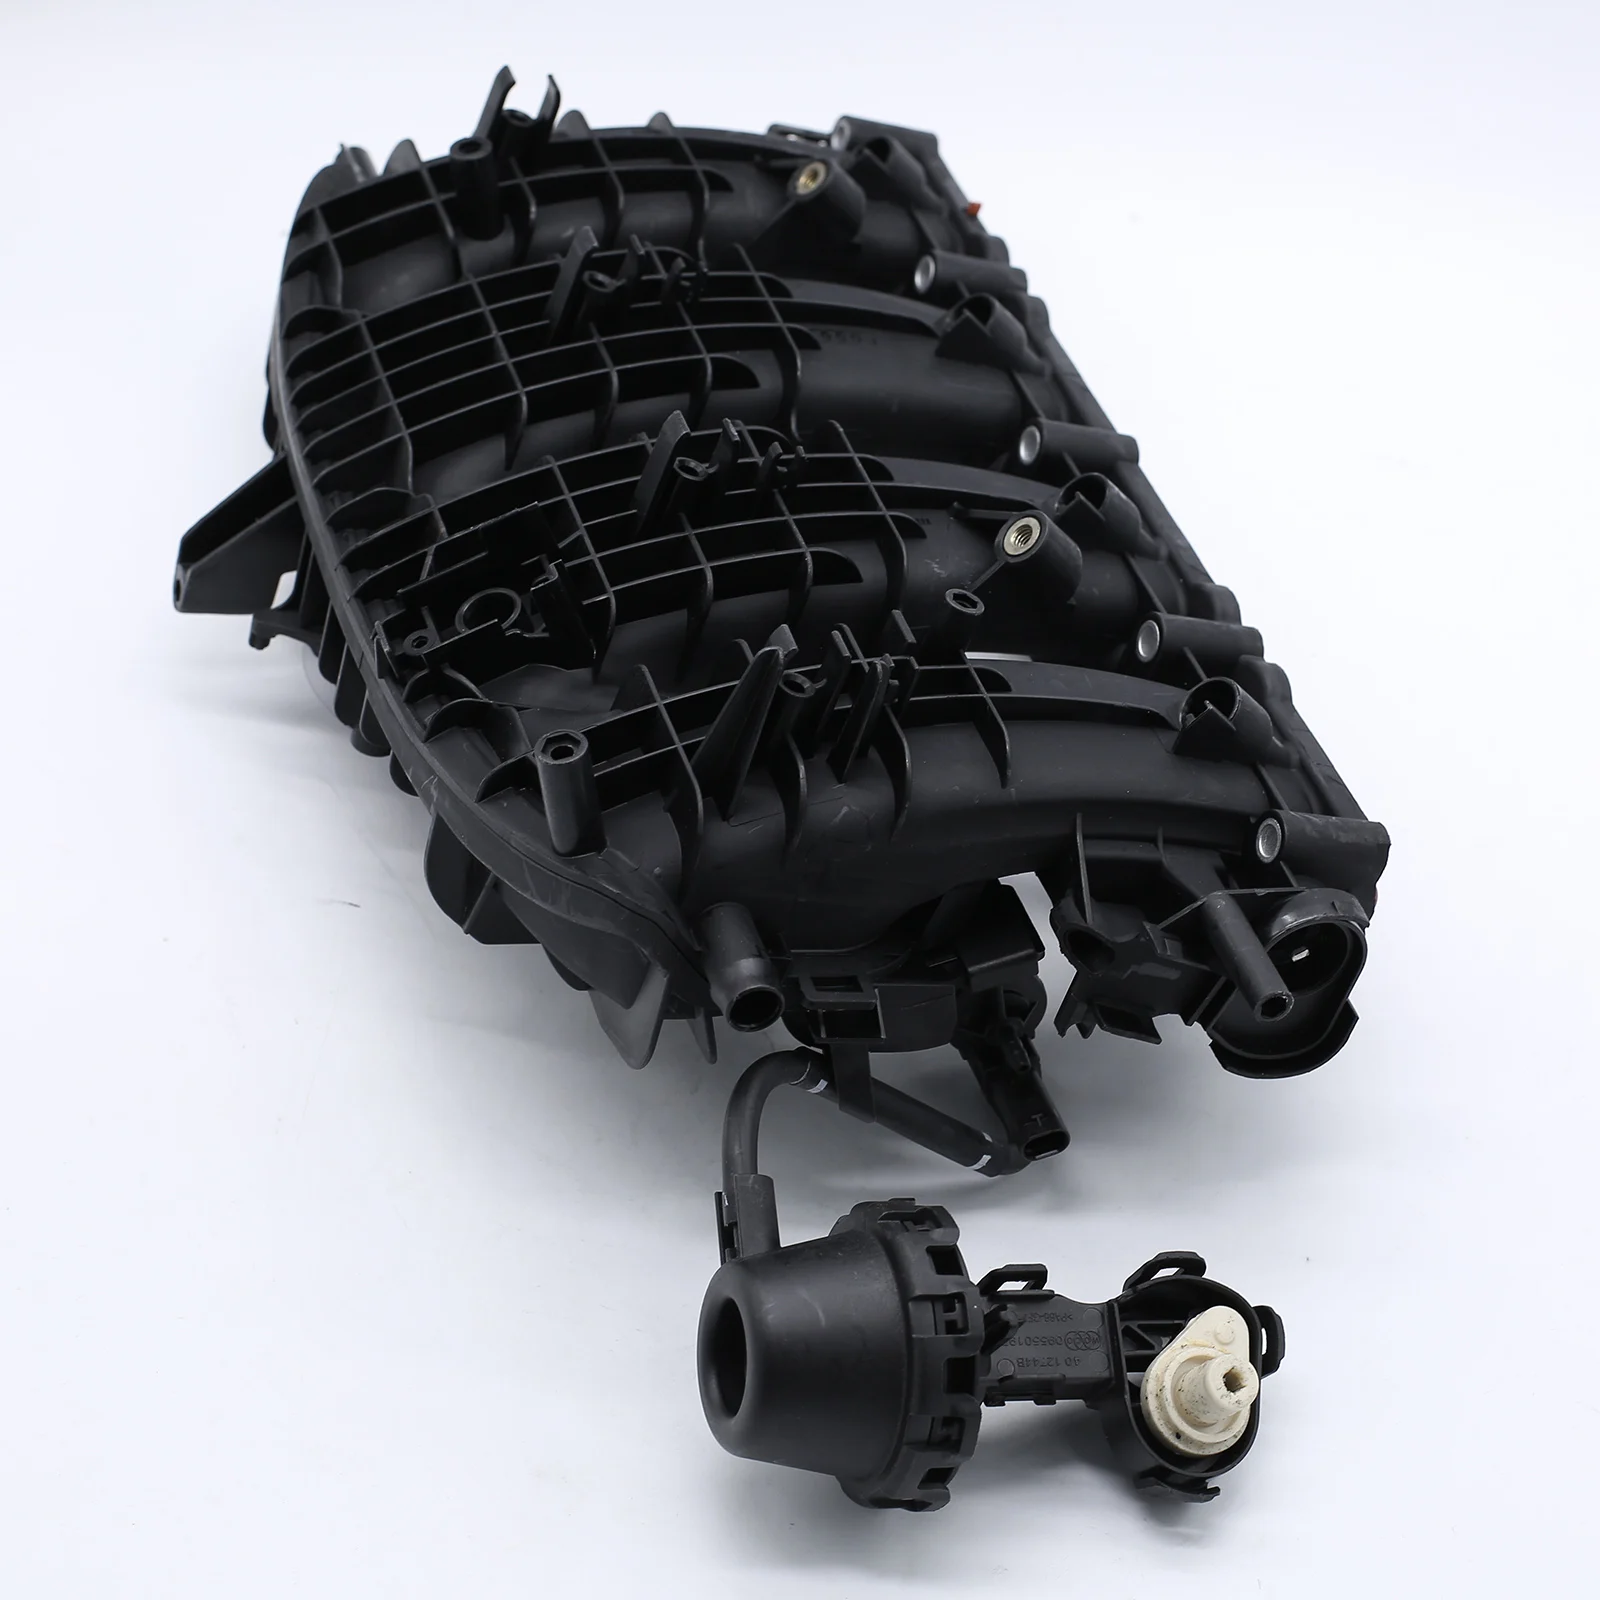 Engine Intake Manifold 06J133201AS 06J133201G Replacement Fit for Tiguan